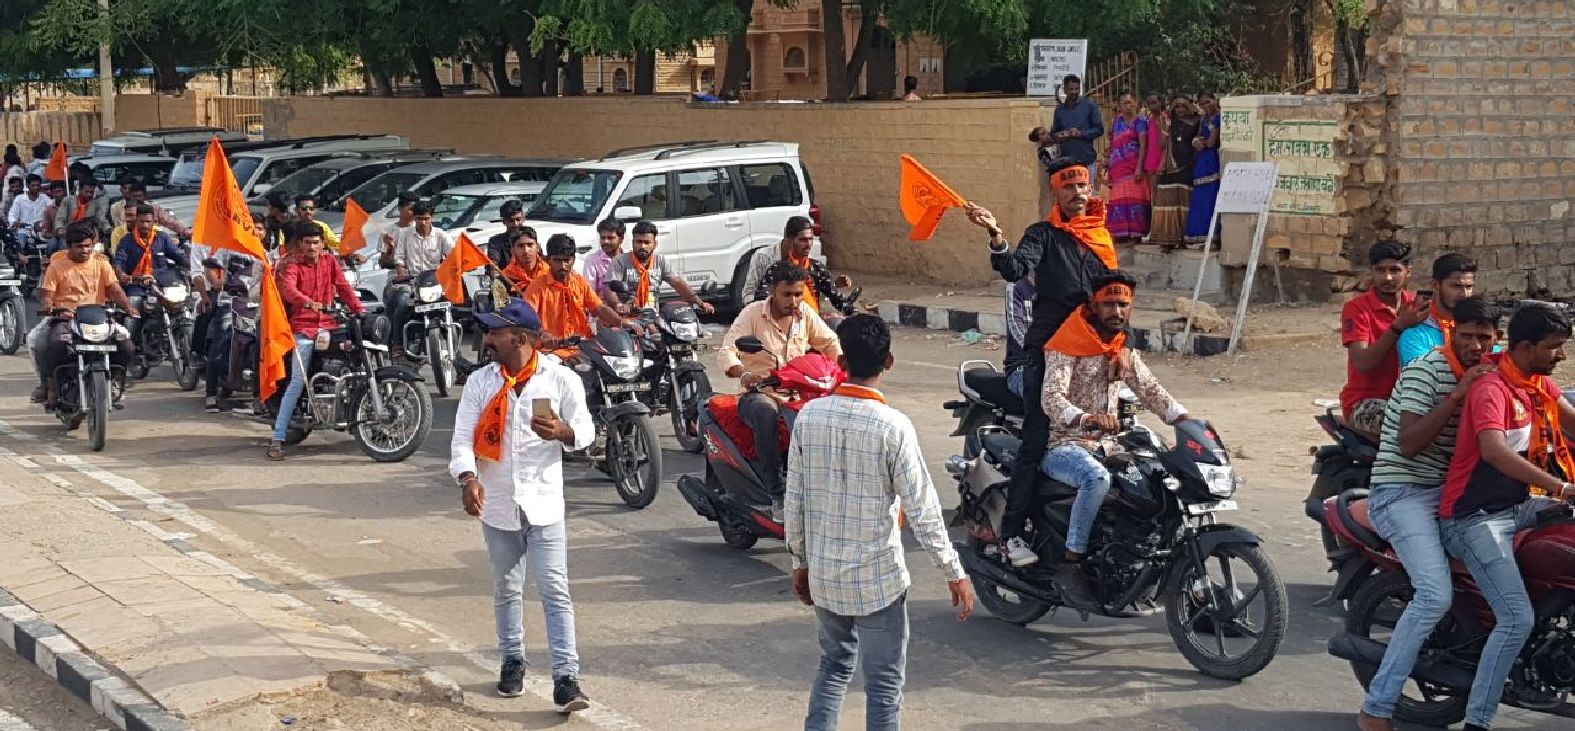 Student Union election 2019: Candidates Campaigning by rally